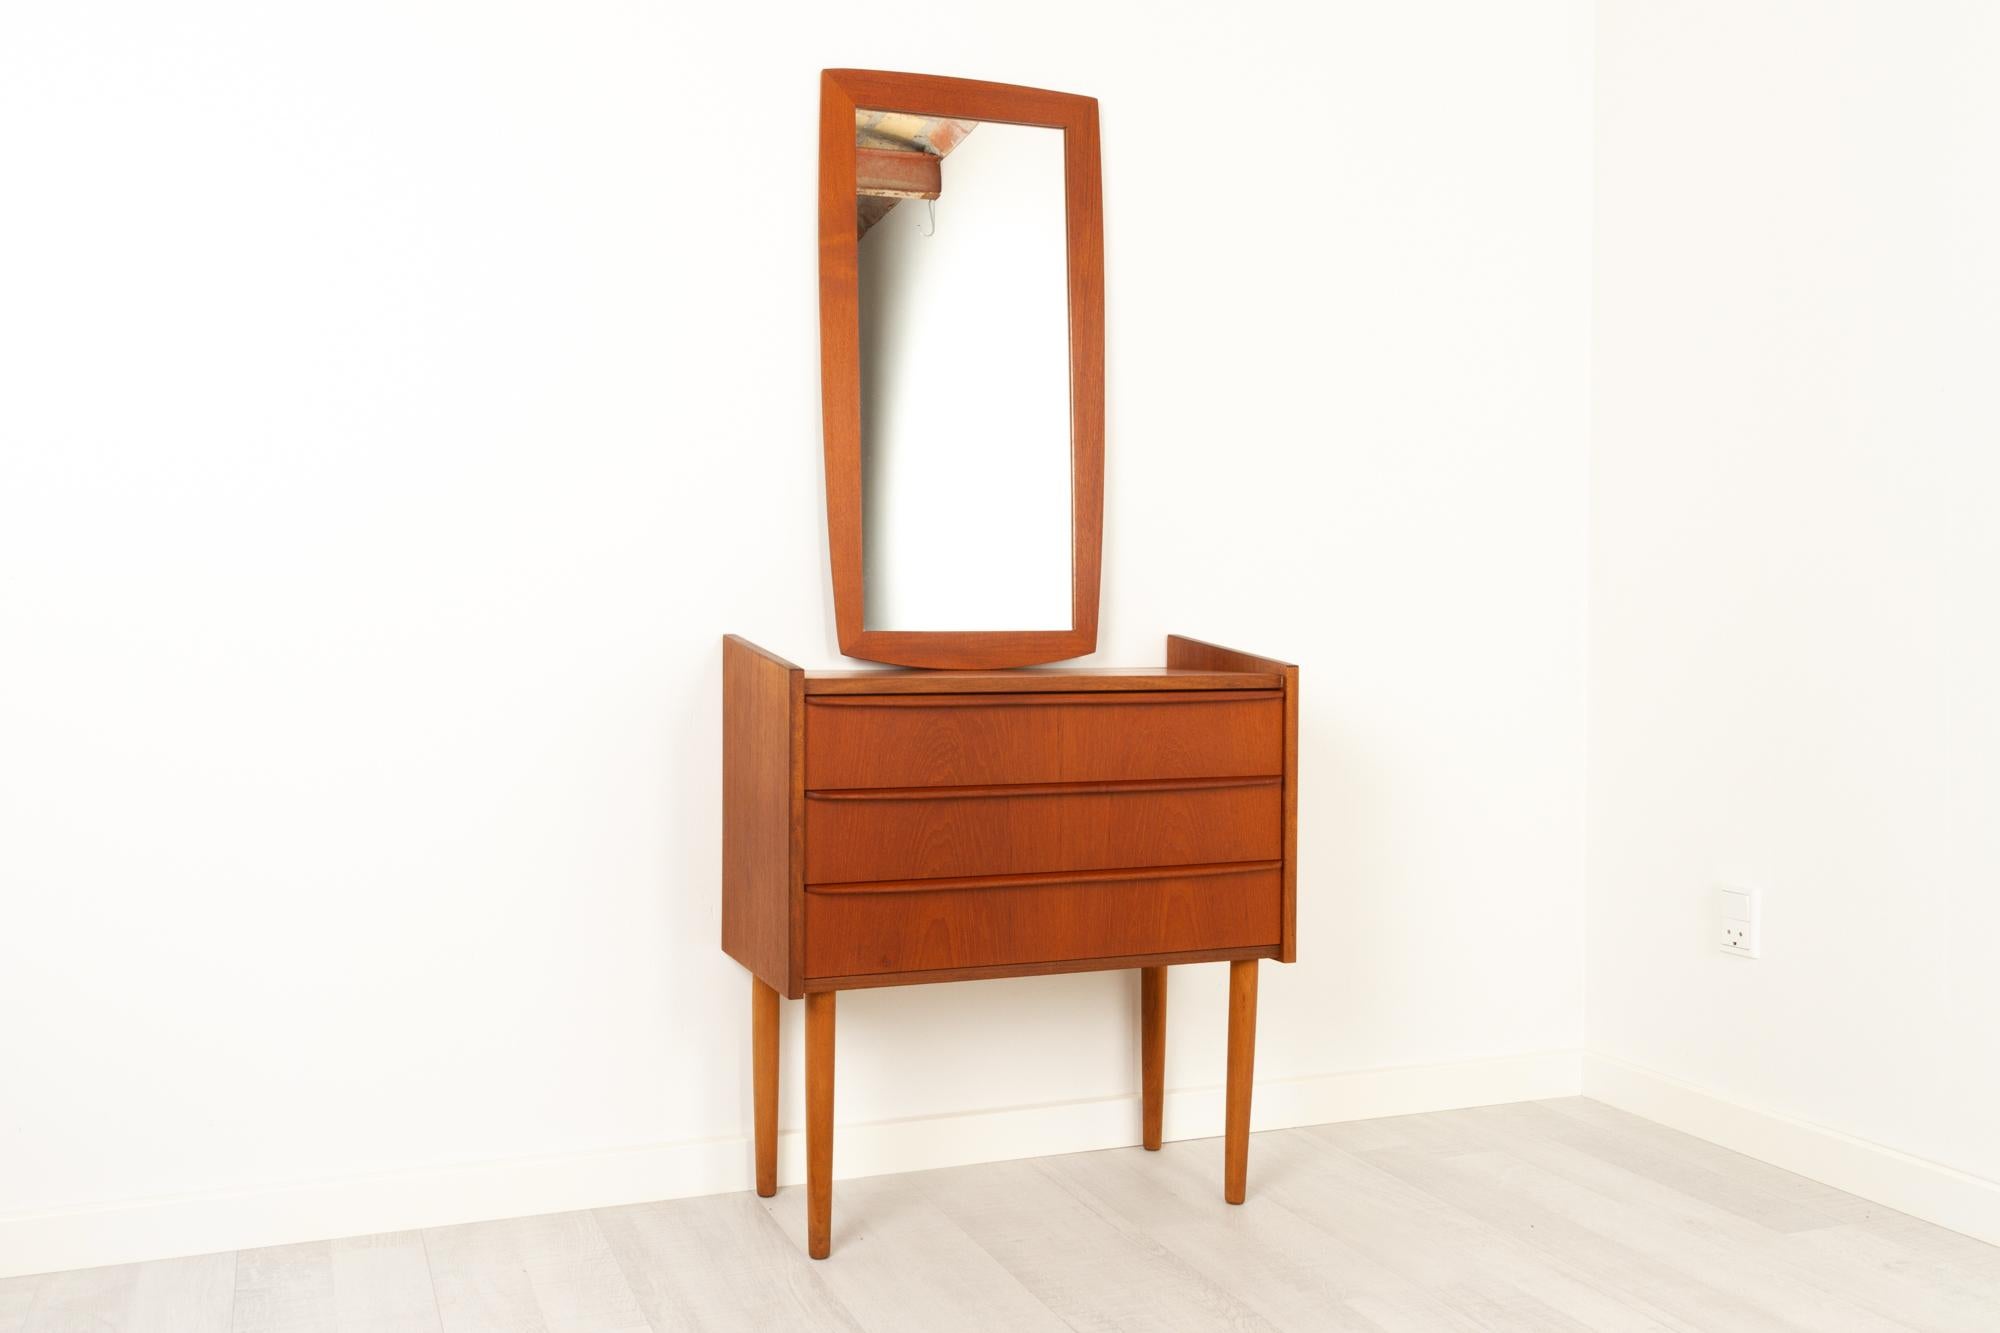 Vintage Danish teak hallway mirror and dresser, 1960s, set of 2
Danish Modern small chest of drawers with three drawers, that can also be used as a bedside table. Tall round tapered legs. Mirror framed in solid teak.
A Classic Mid-Century Modern